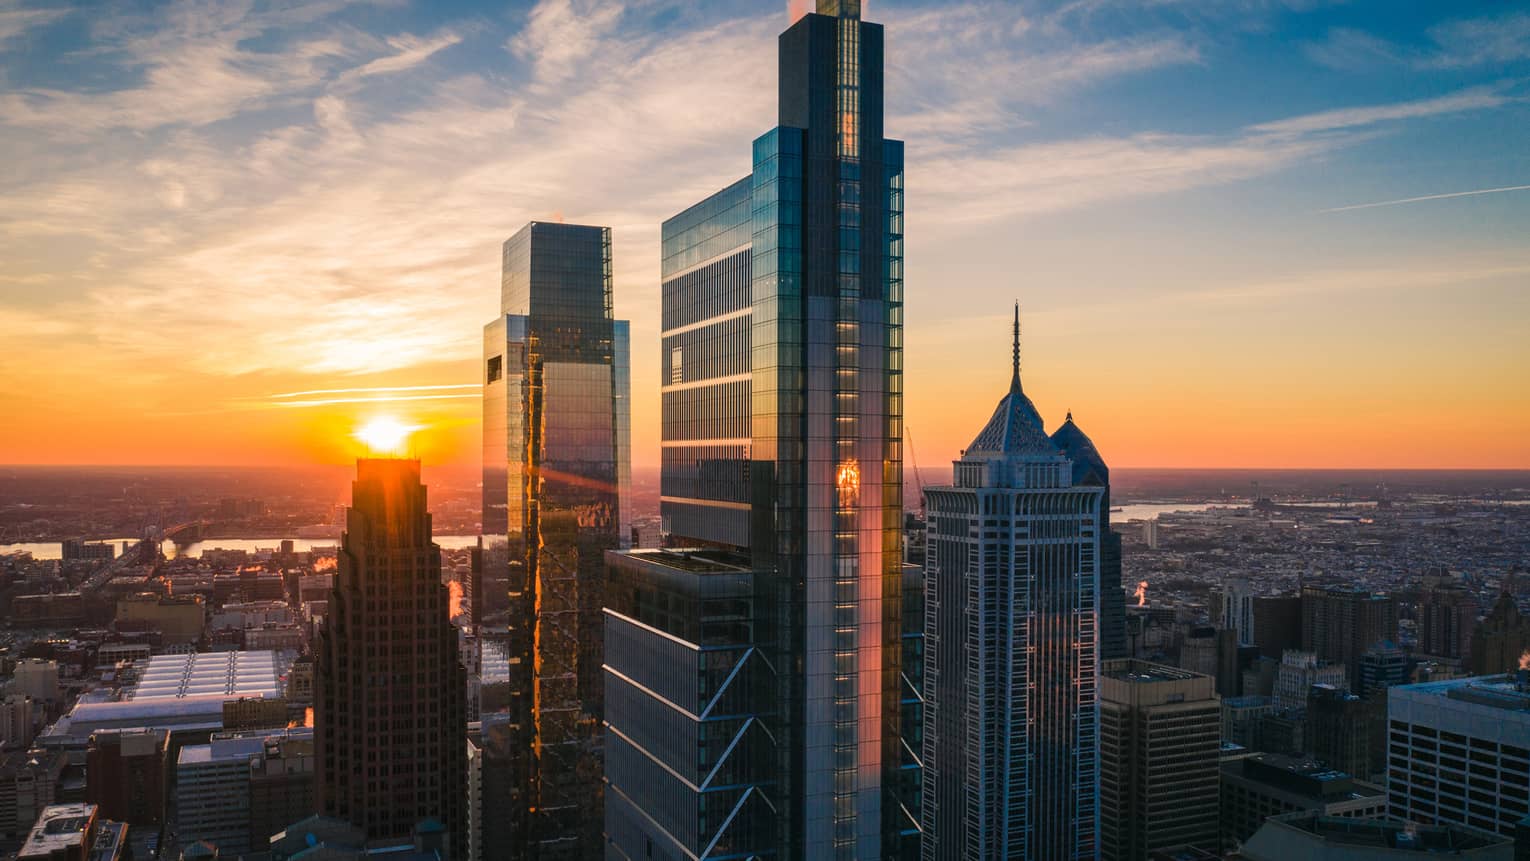 Philadelphia’s skyscrapers soaring above an expansive city, with a sunset-illuminated sky in the background.